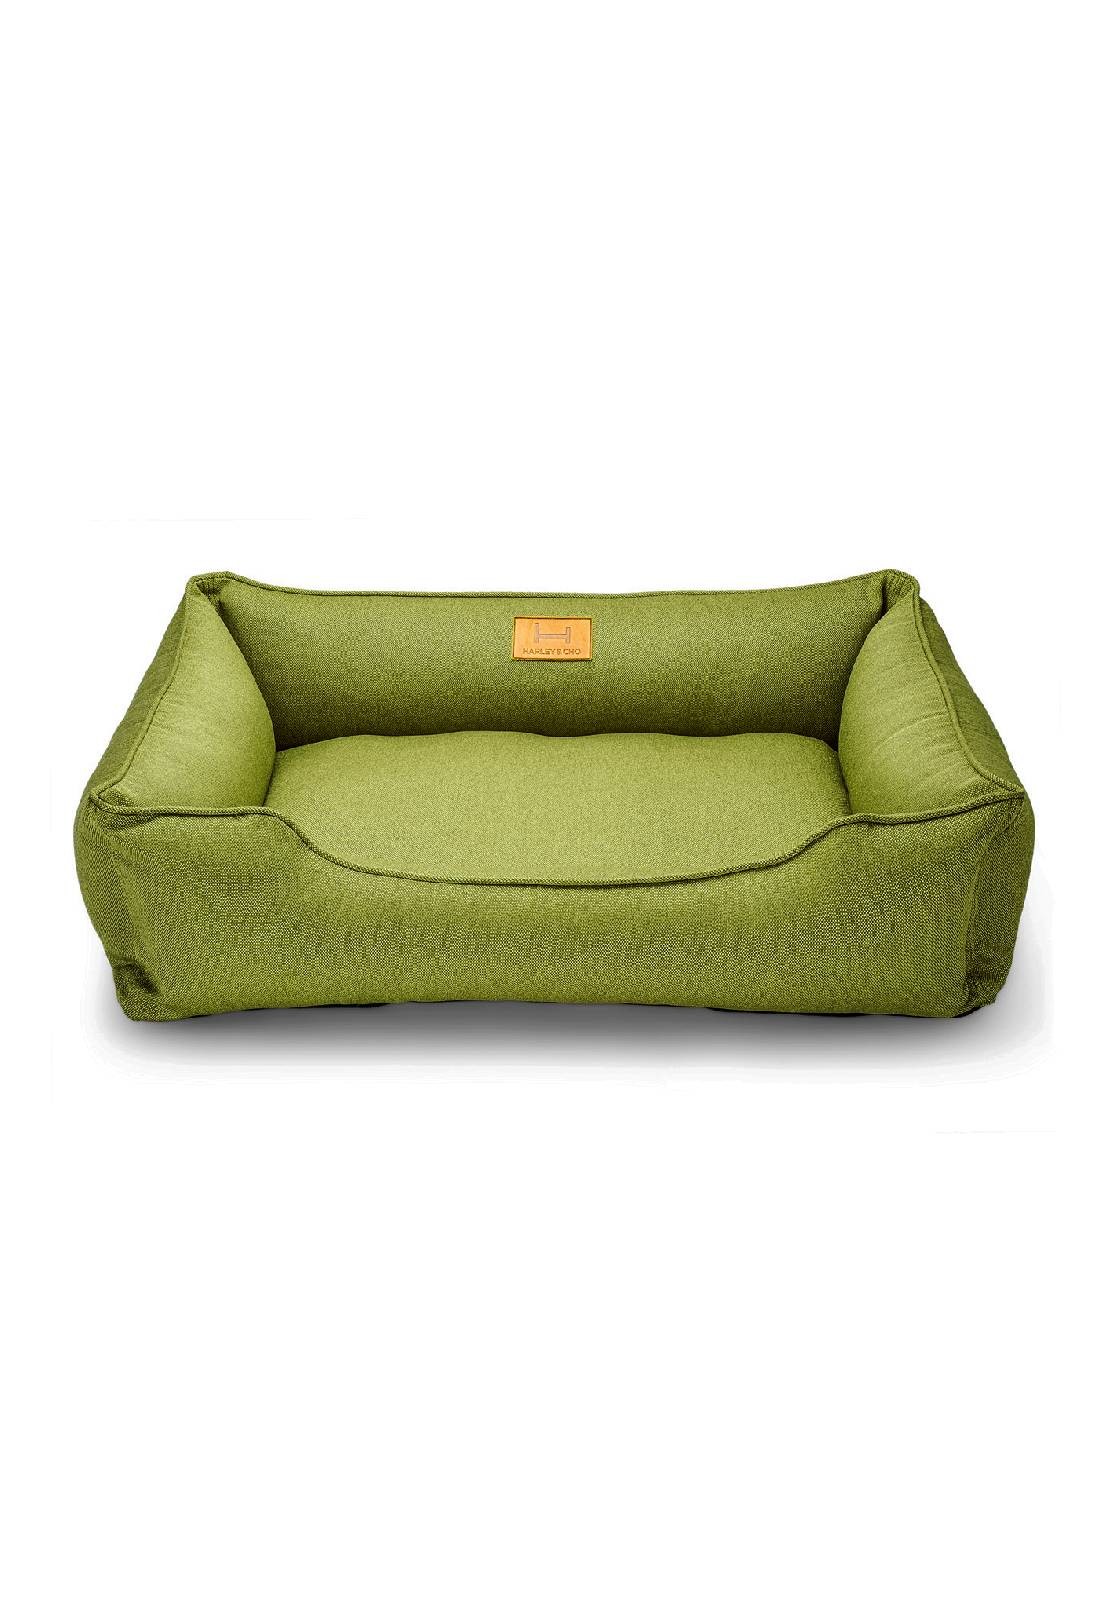 Pet bed Harley and Cho Dreamer Olive XXL (120x80 cm) 3010085